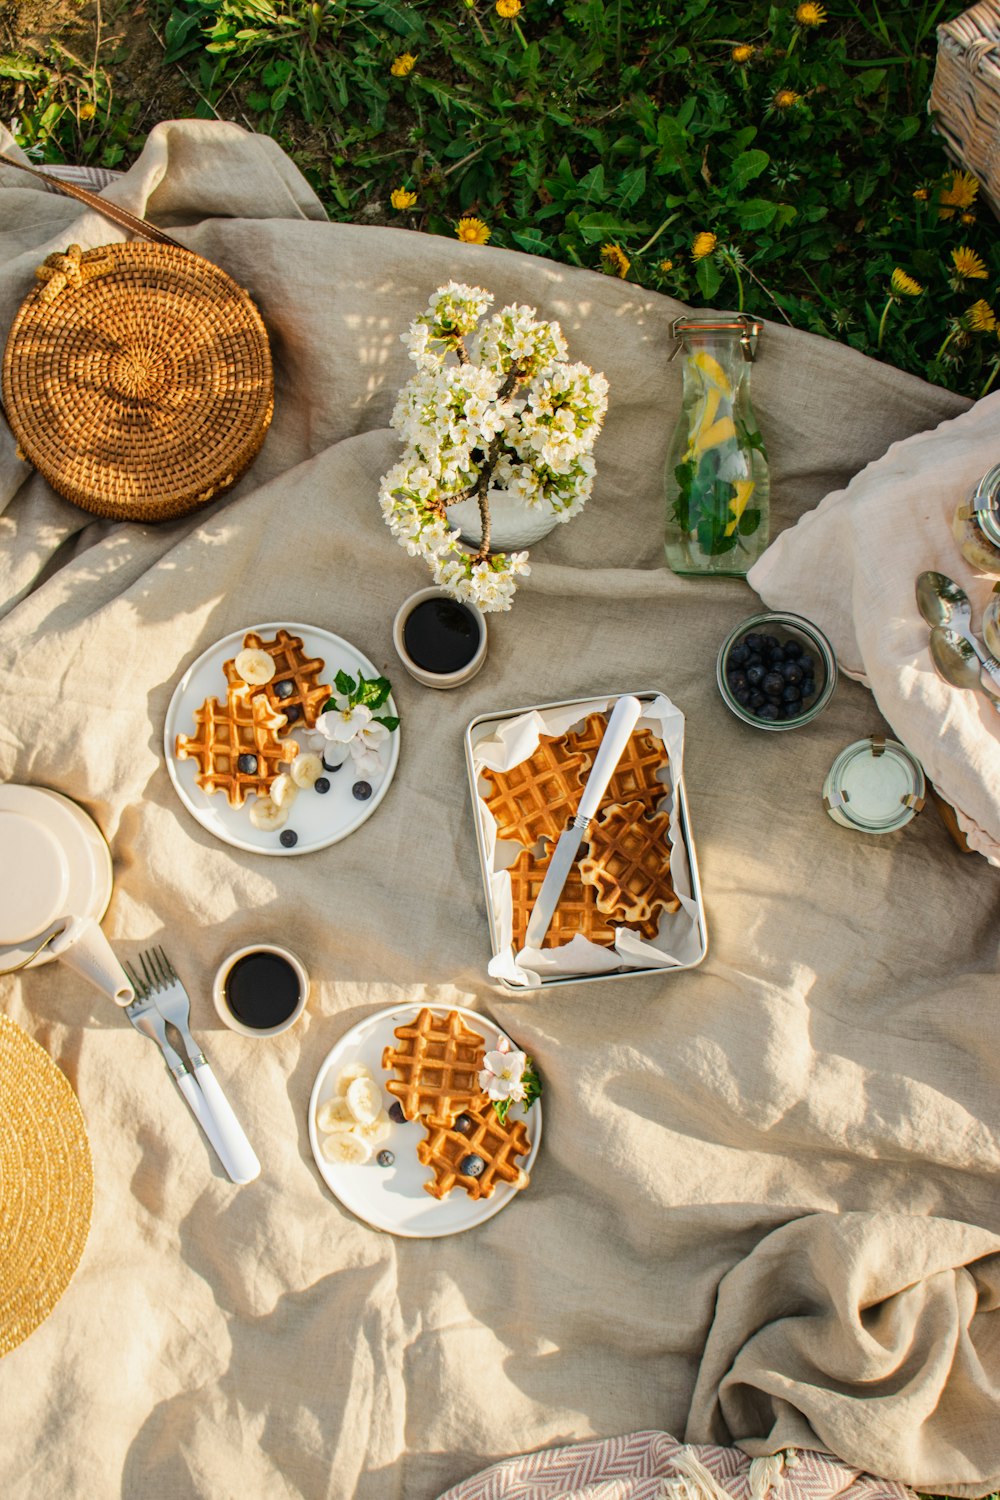 a table with plates of food and a basket of flowers